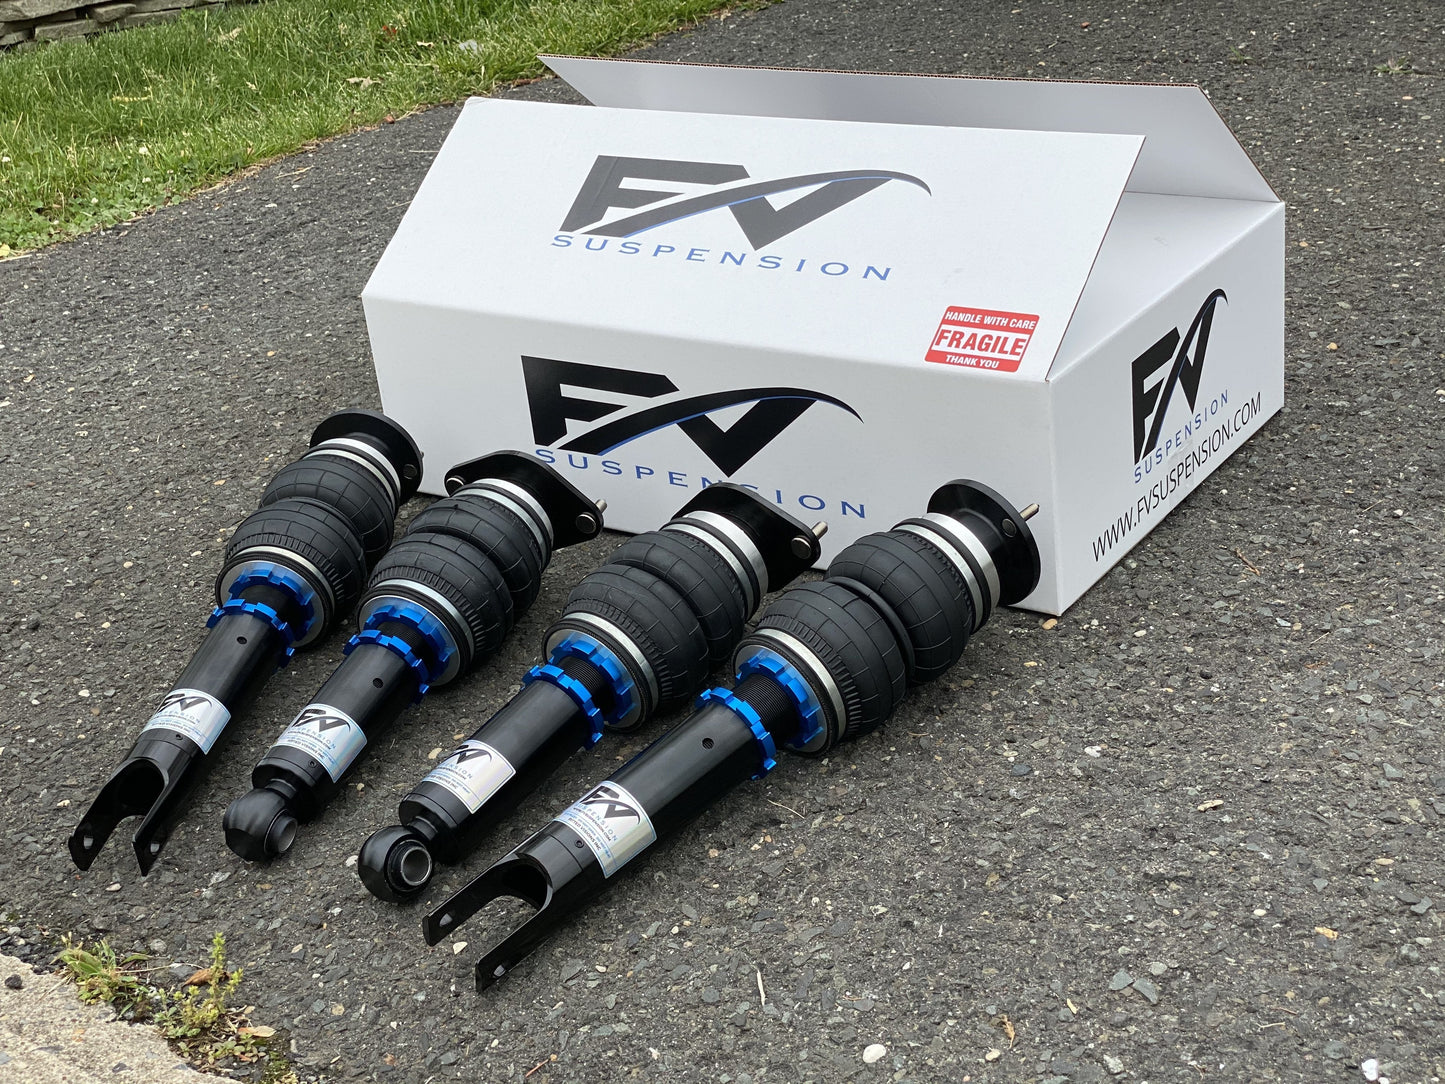 FV Suspension 3H Tier 3 Complete Air Ride kit for 90-18 Mercedes-Benz G-Wagon W463 - Full Kit